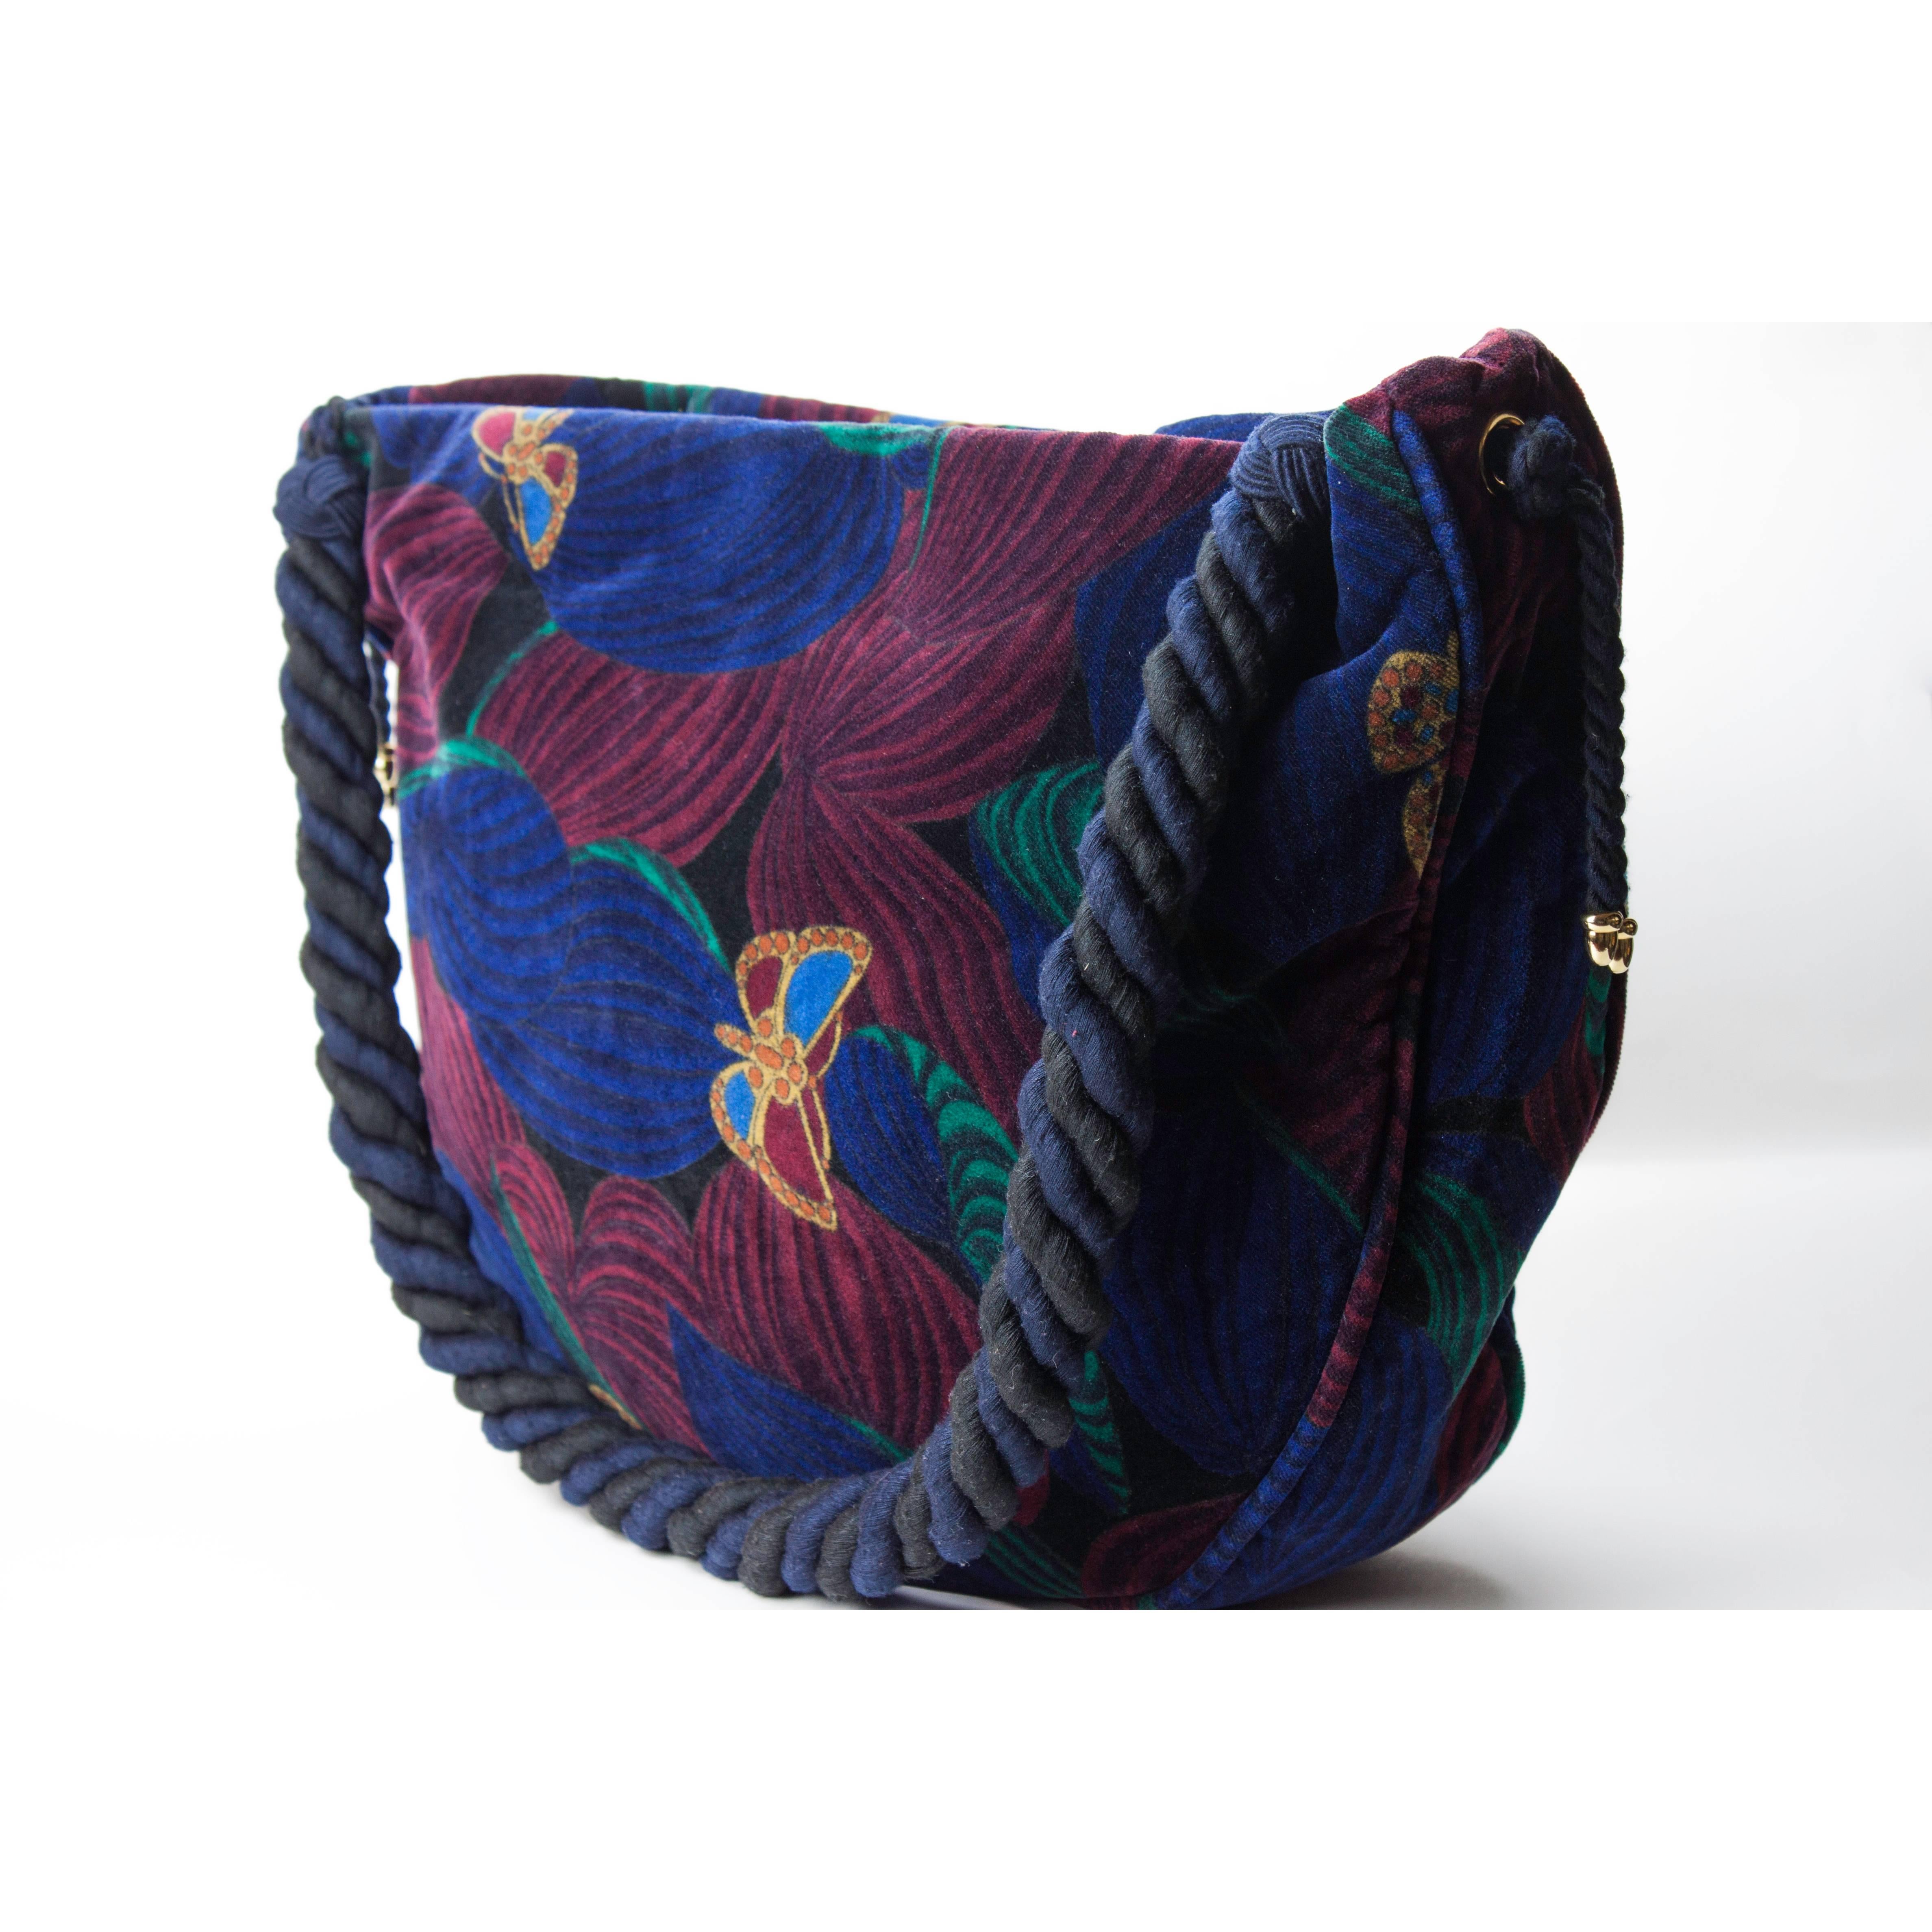 

The colours, print design and material of this Bottega Veneta shoulder bag bring to mind nothing so much as the textures, sinuosity, luminescence and velvety surface of exotic butterflies.

Indeed, this bag shows Bottega Veneta's tradition of